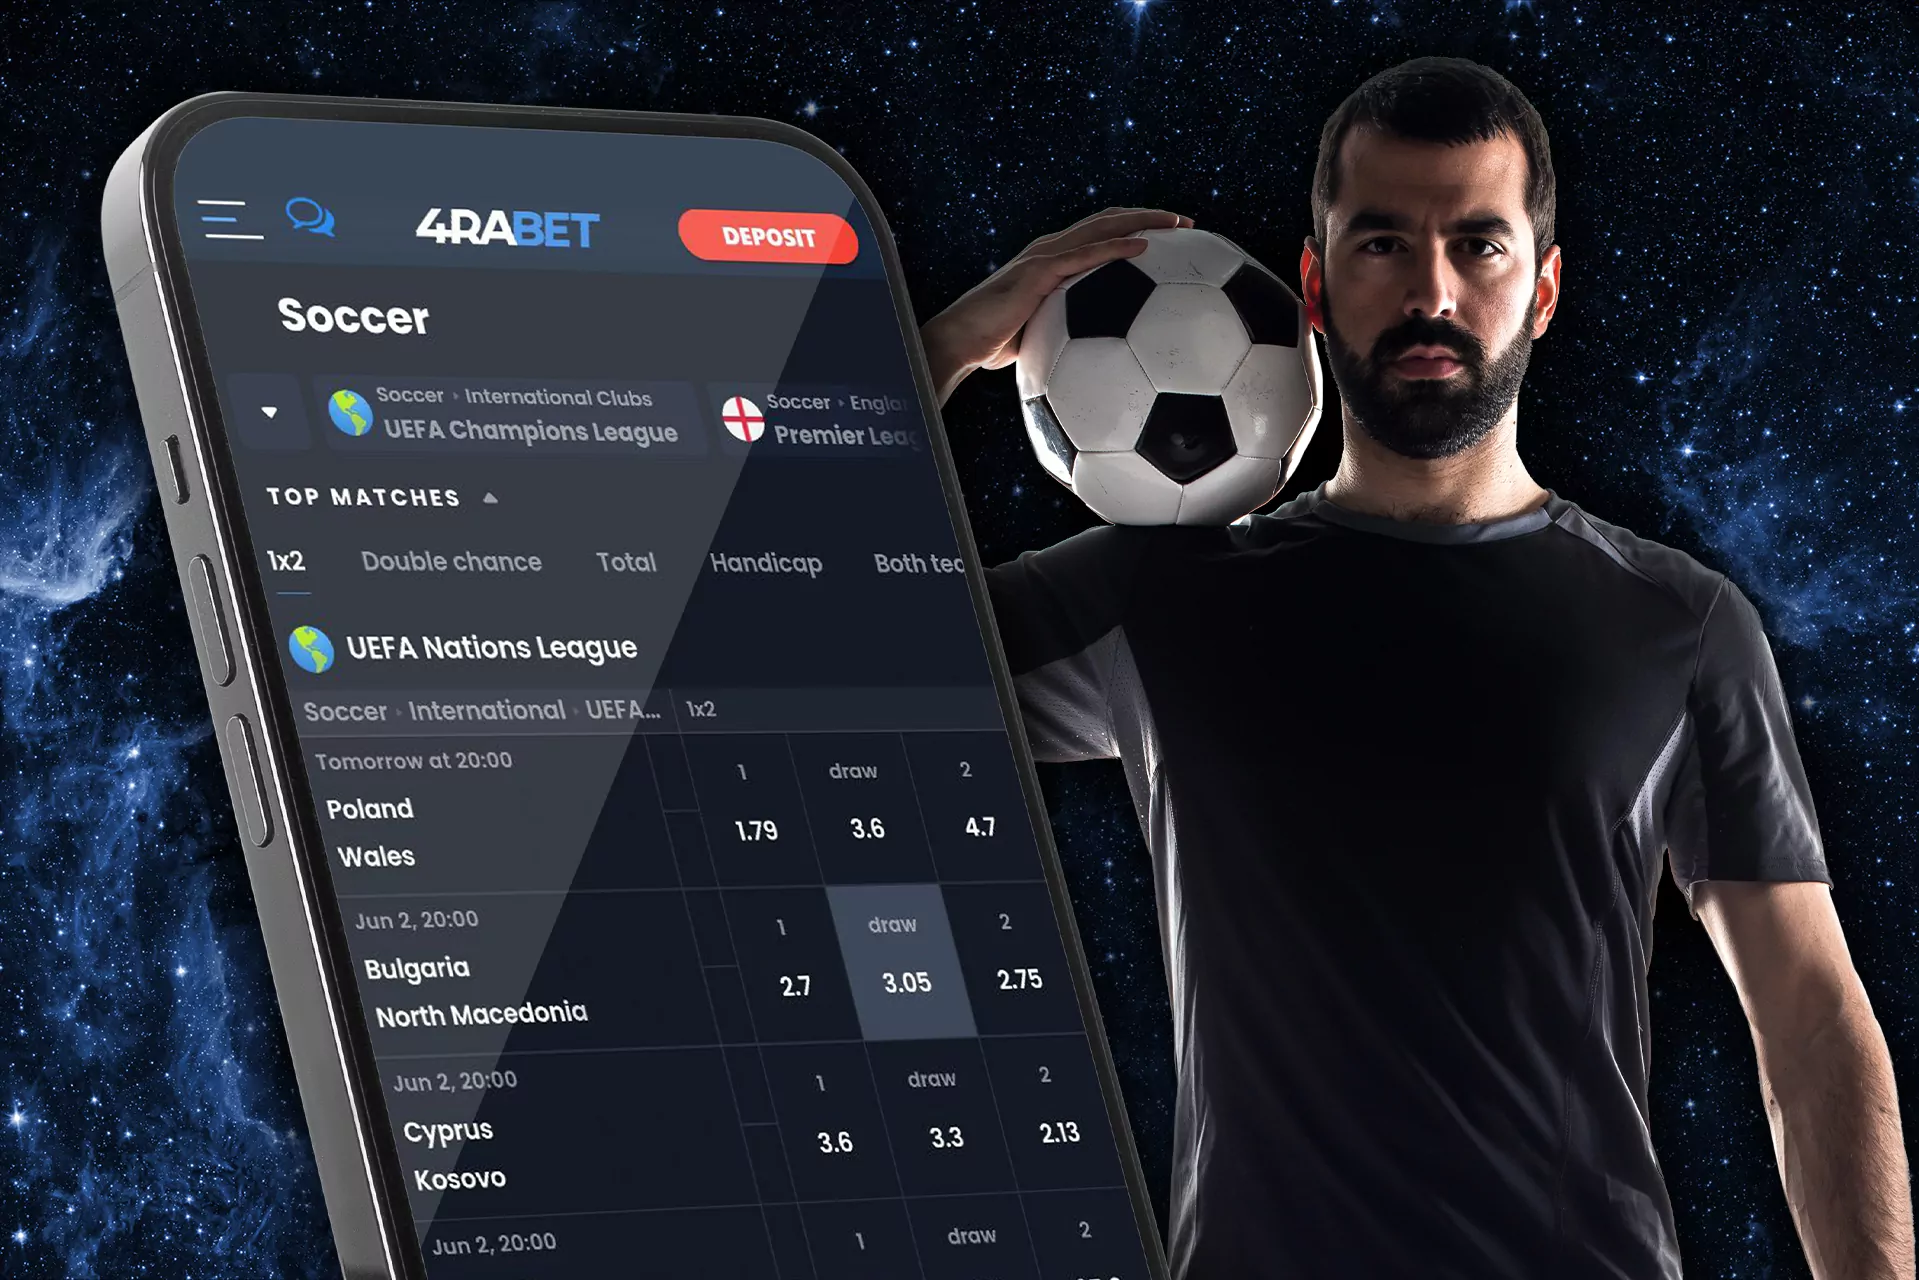 You can place bets on football teams in the 4rabet mobile app.